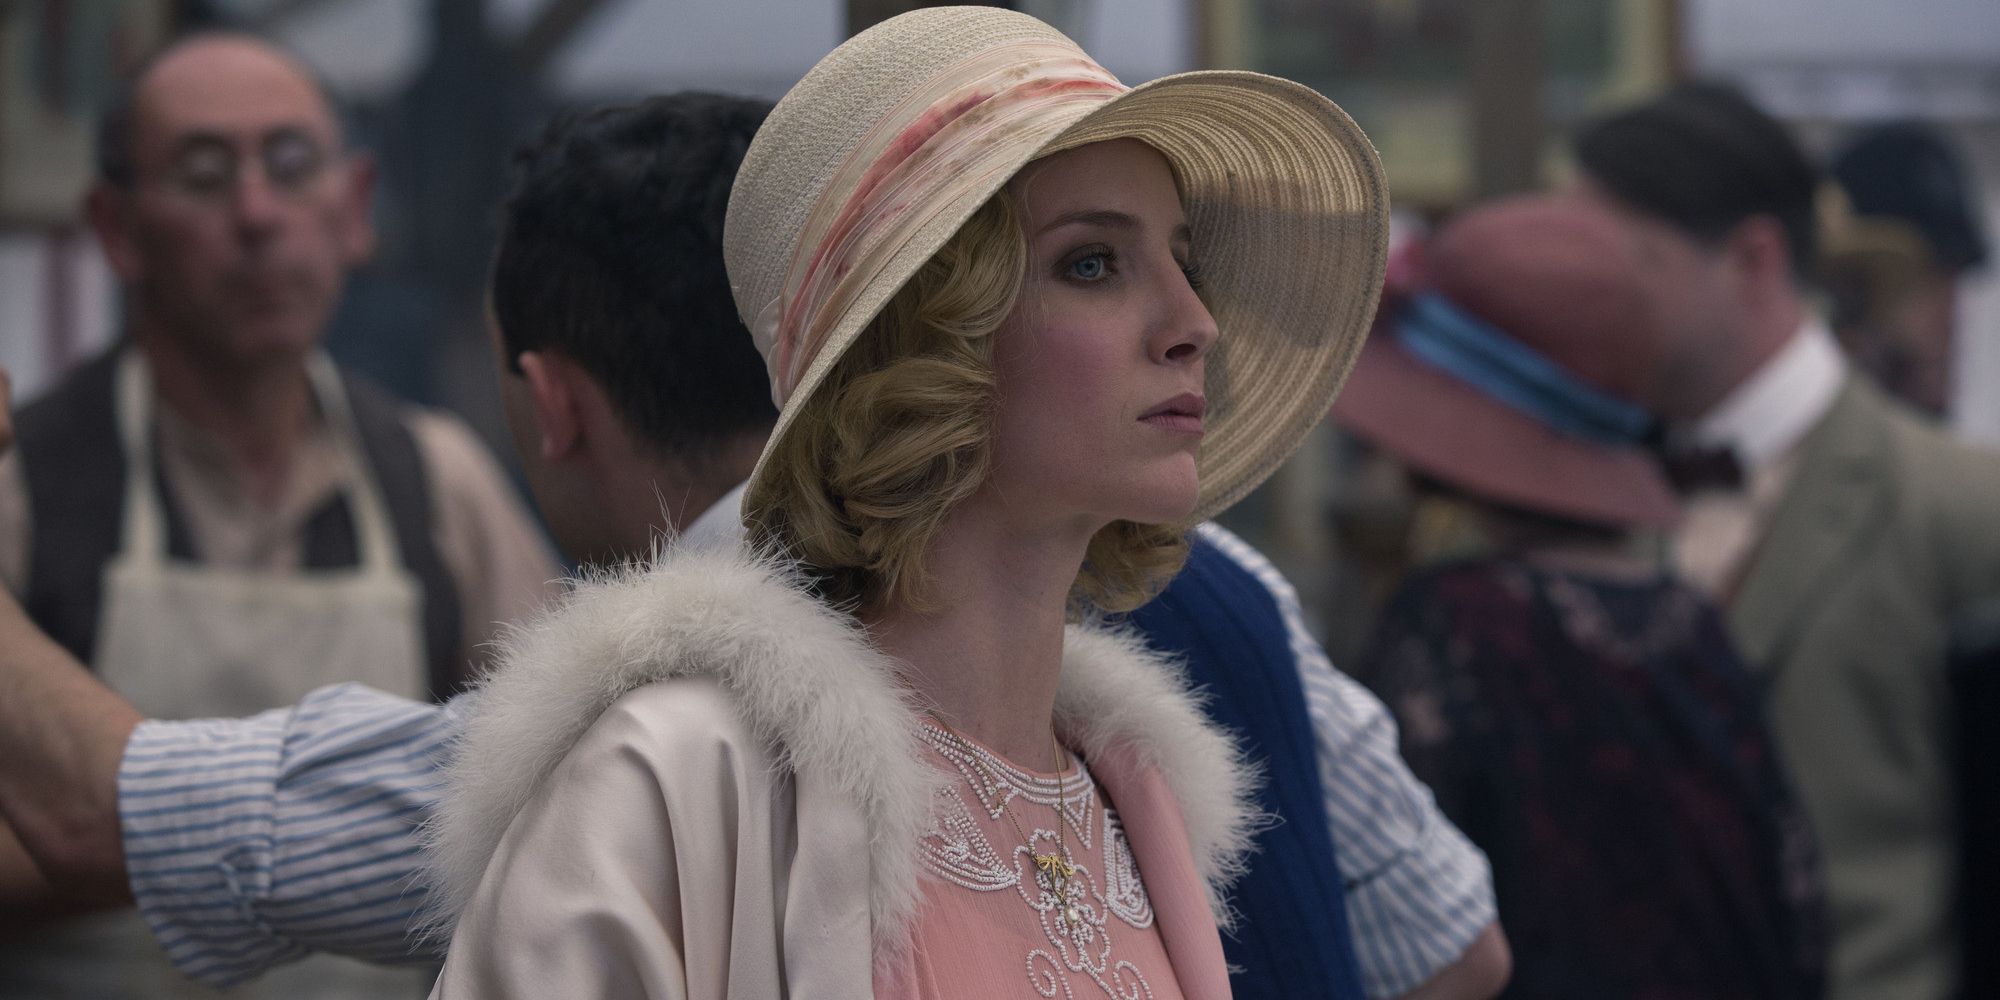 Grace Shelby in a hat looking into the crowd in Peaky Blinders